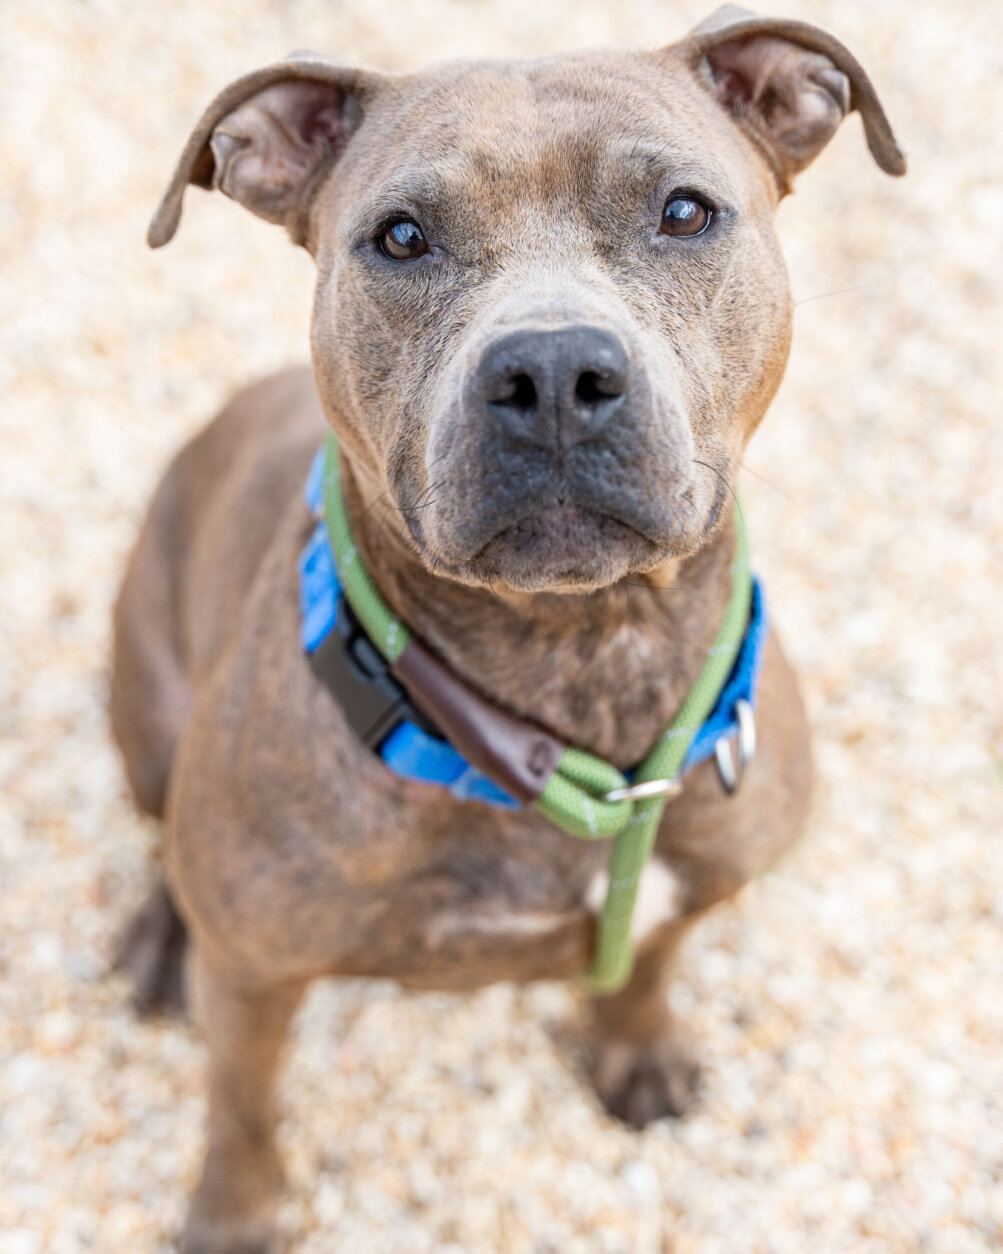 <p>Meet Fiona! Fiona is a sweet, well-mannered, smart pup who already knows several commands and walks nicely on a leash! She recently had a super fun day out of the shelter and her temporary foster let us know she was a total joy to host!</p>
<p>Fiona would like you to know that if you sit down, she will give you full body wiggles, hugs and kisses and proceed to curl up by your side (or directly on top of you)! But when you are ready for some fun Fiona will be by your side ready for any adventure.</p>
<p>This sweet girl would like a home with squeaky toys, comfy places to snooze, and pets and attention multiple times per day. To learn more or to take home your new best friend visit <a href="http://humanerescuealliance.org/adopt" target="_blank" rel="noopener">humanerescuealliance.org/adopt</a>.</p>
